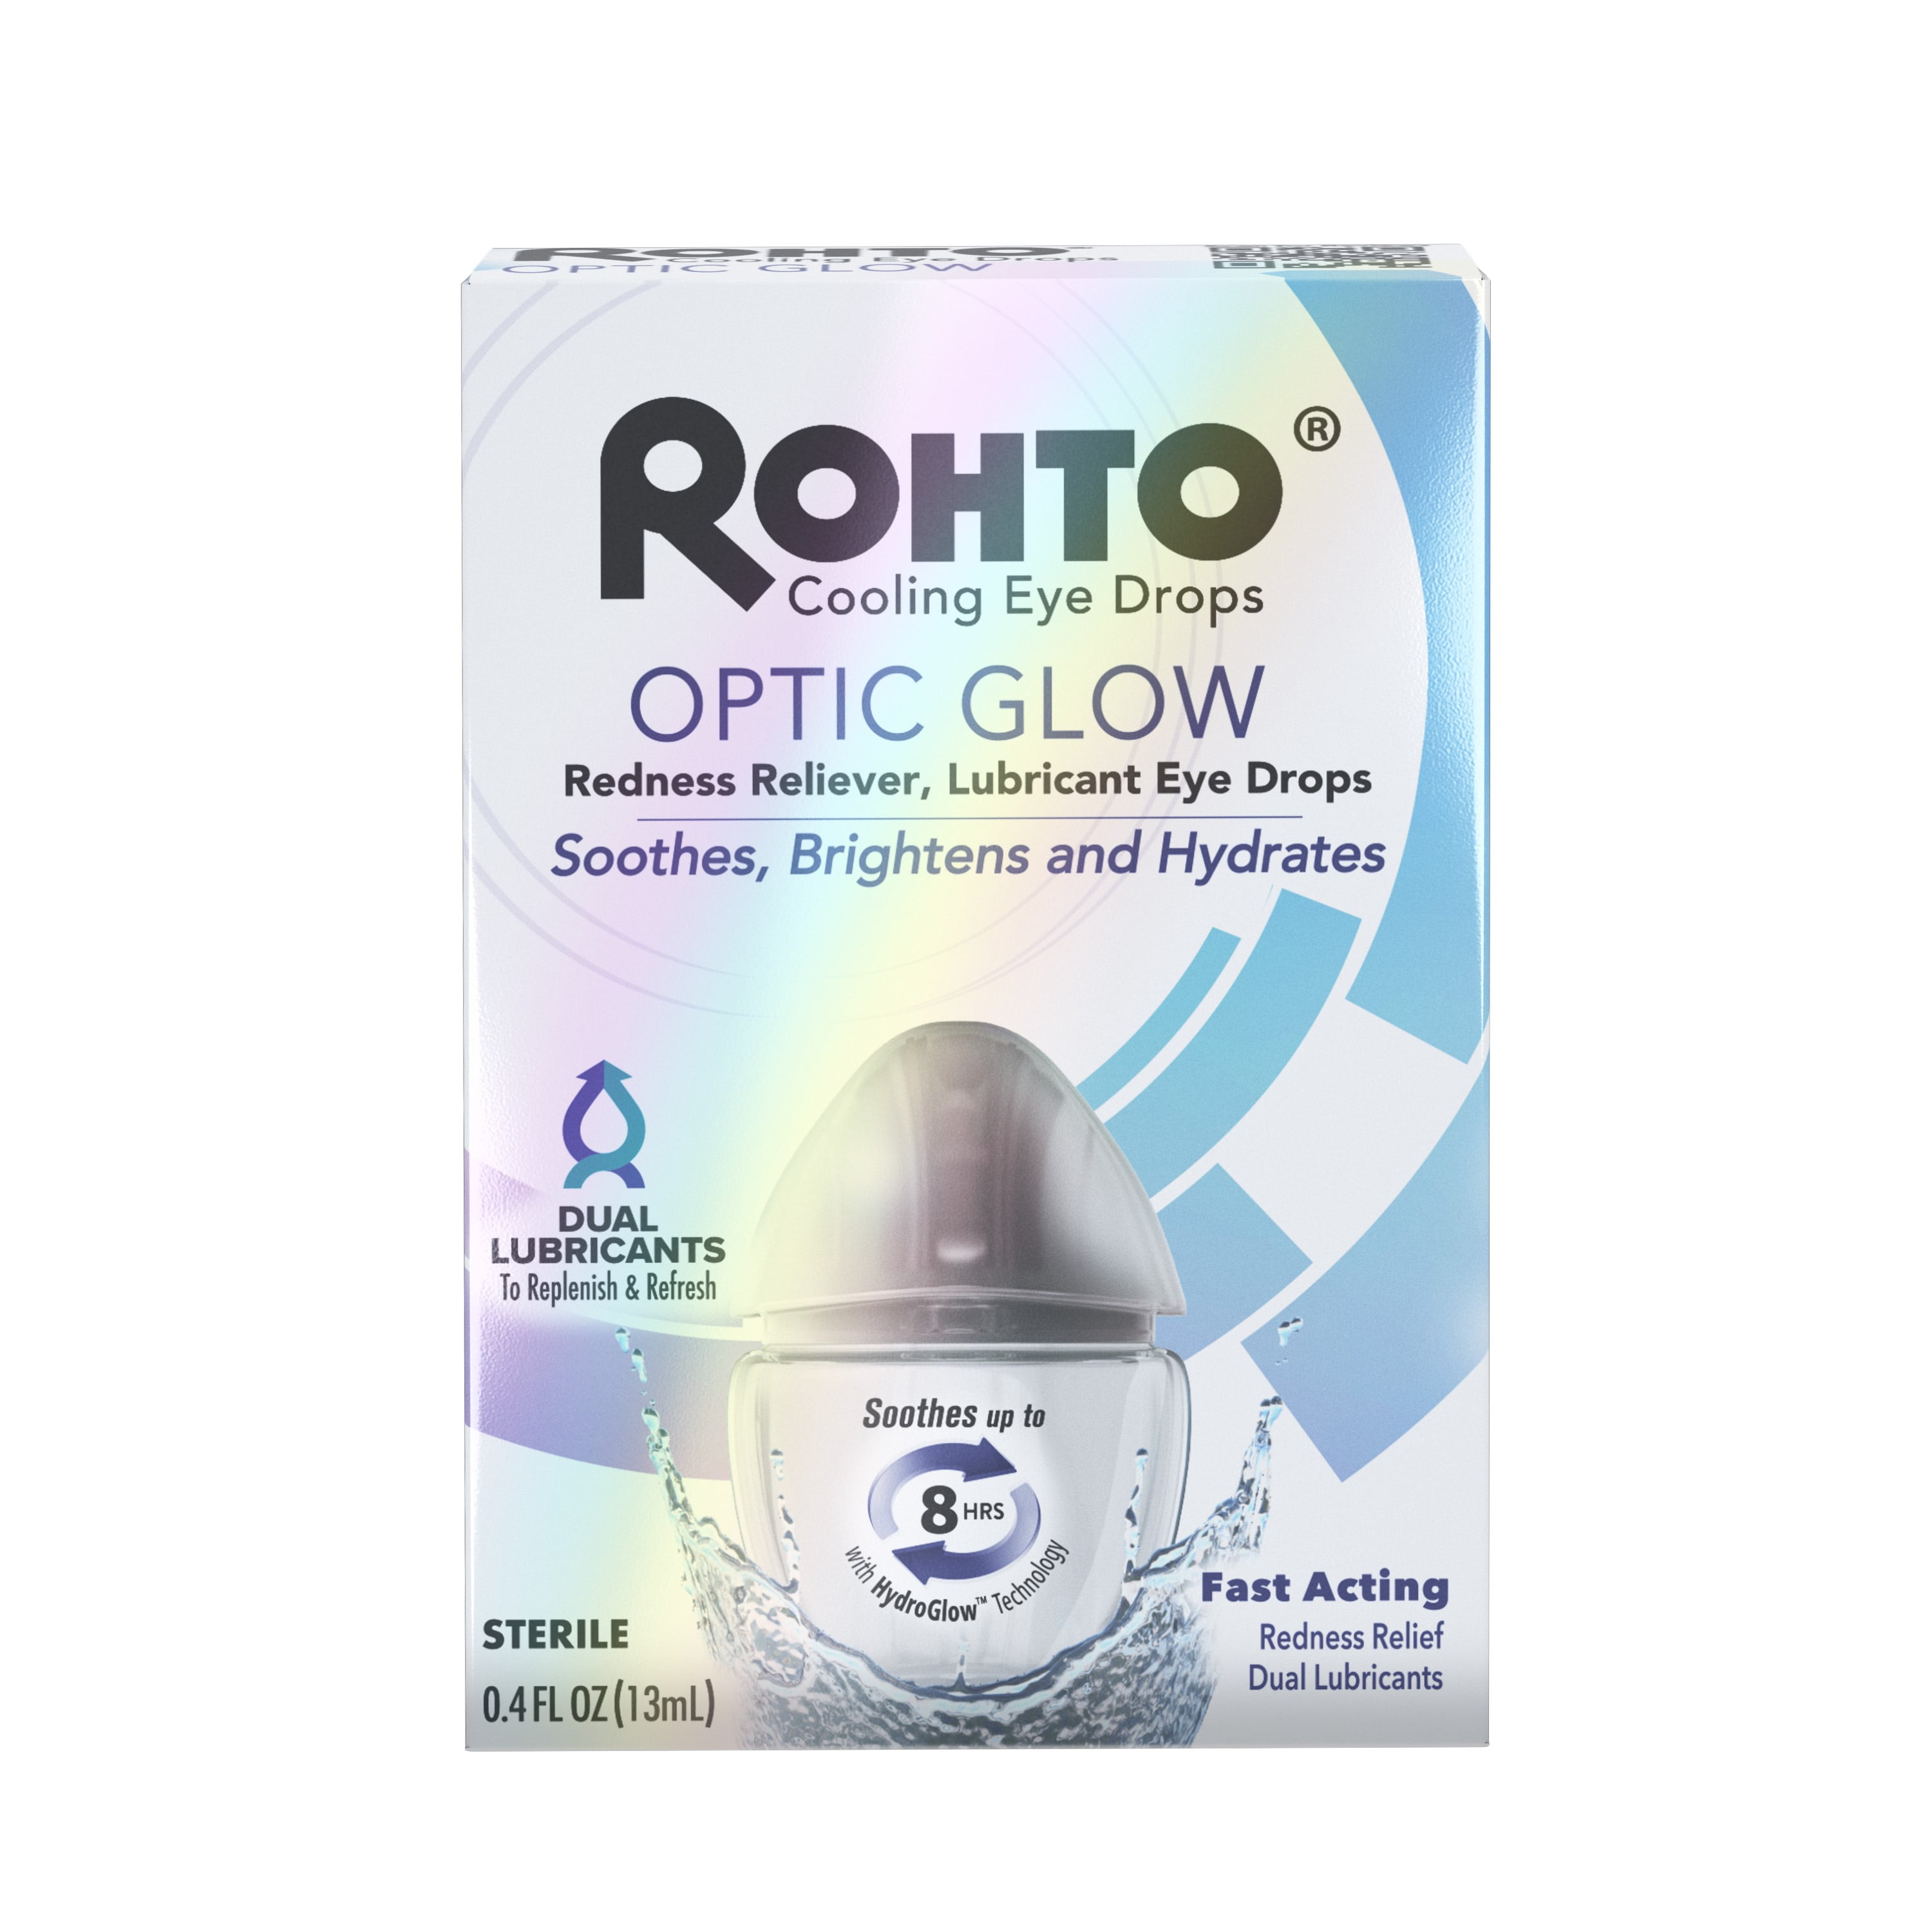 Rohto Optic Glow Cooling Eye Drops Redness Reliever/Lubricant, 0.4 fl oz